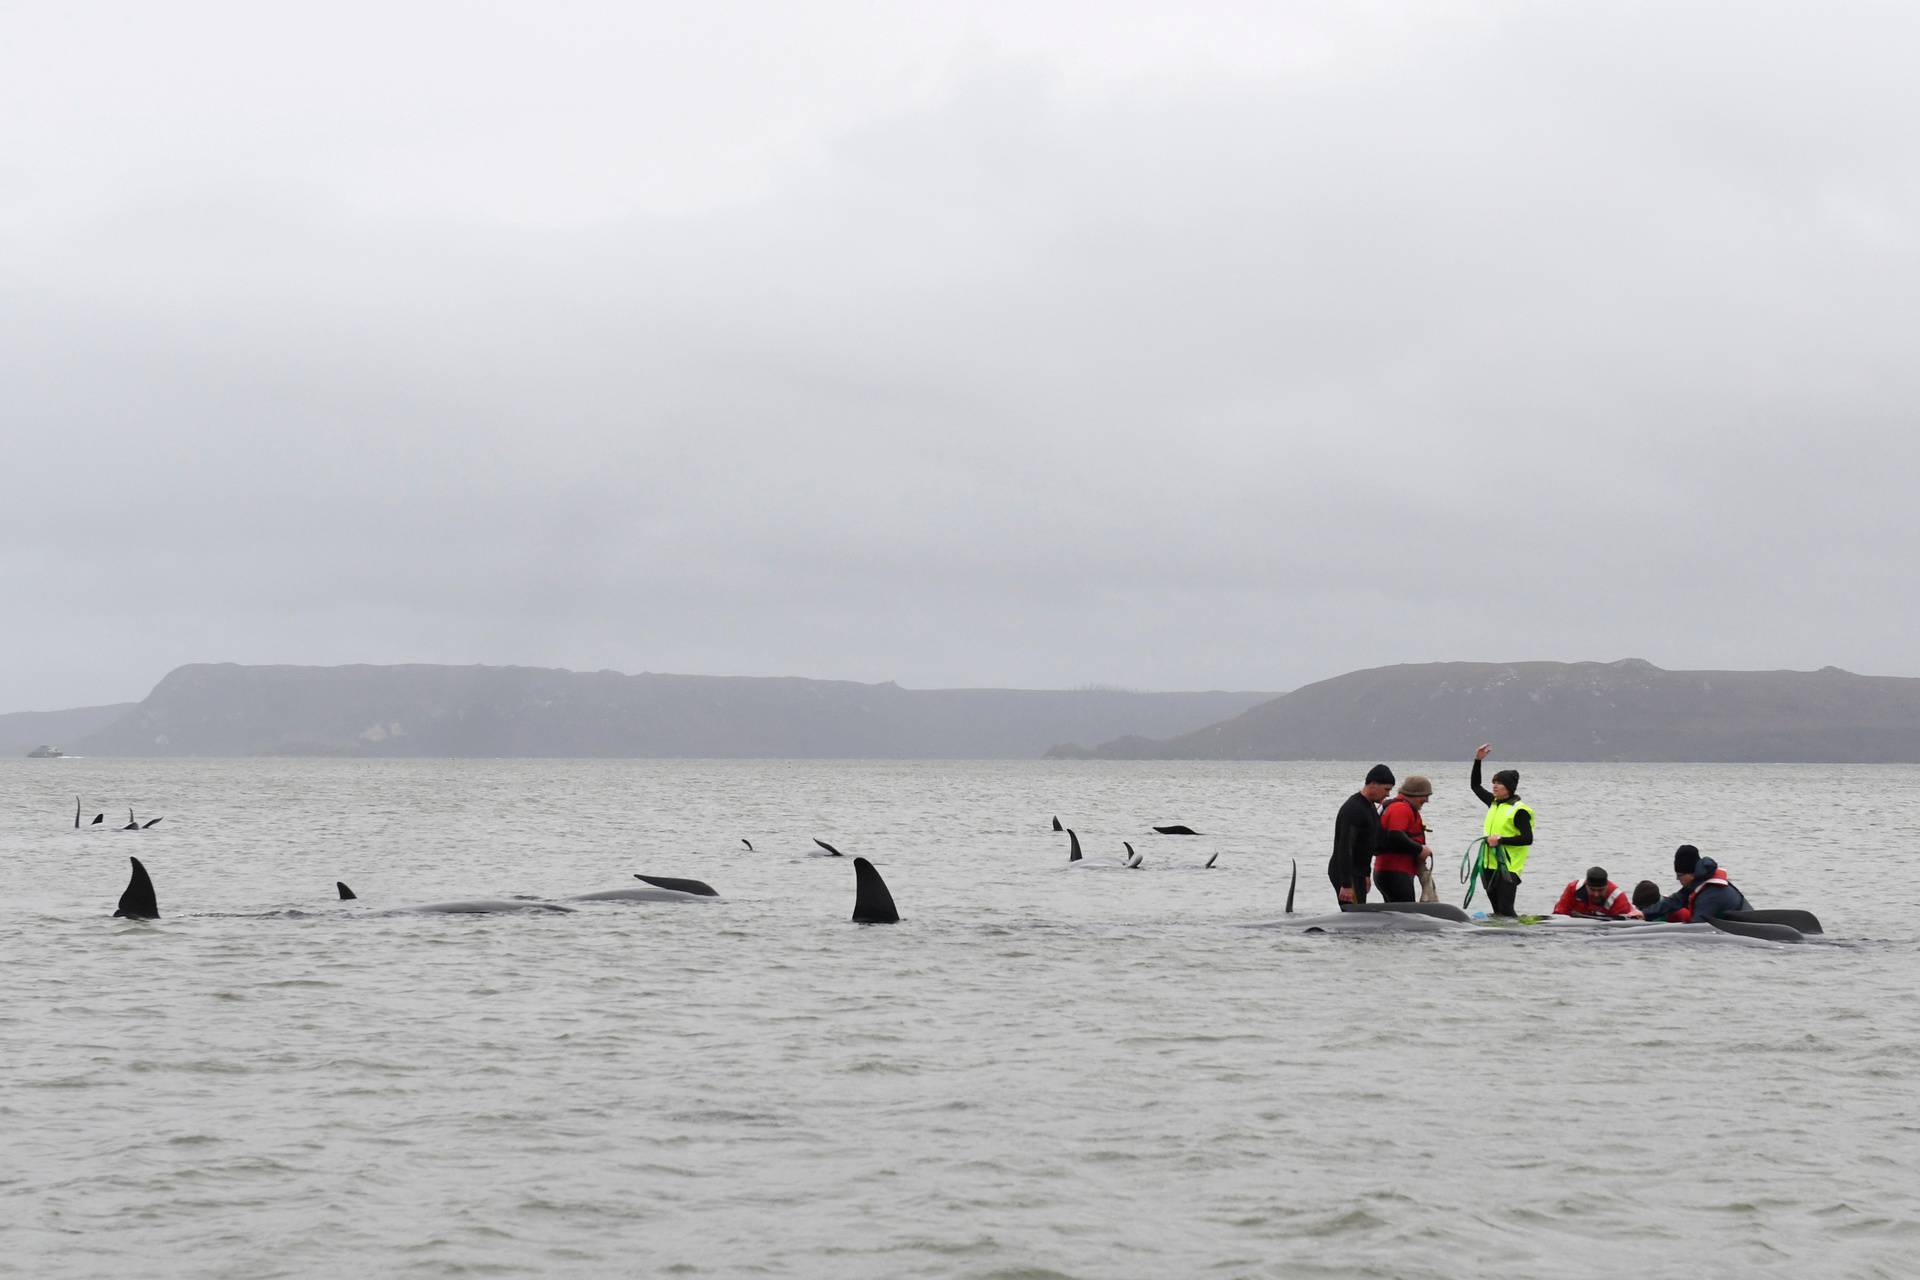 Whale rescue efforts take place at Macquarie Harbour in Tasmania